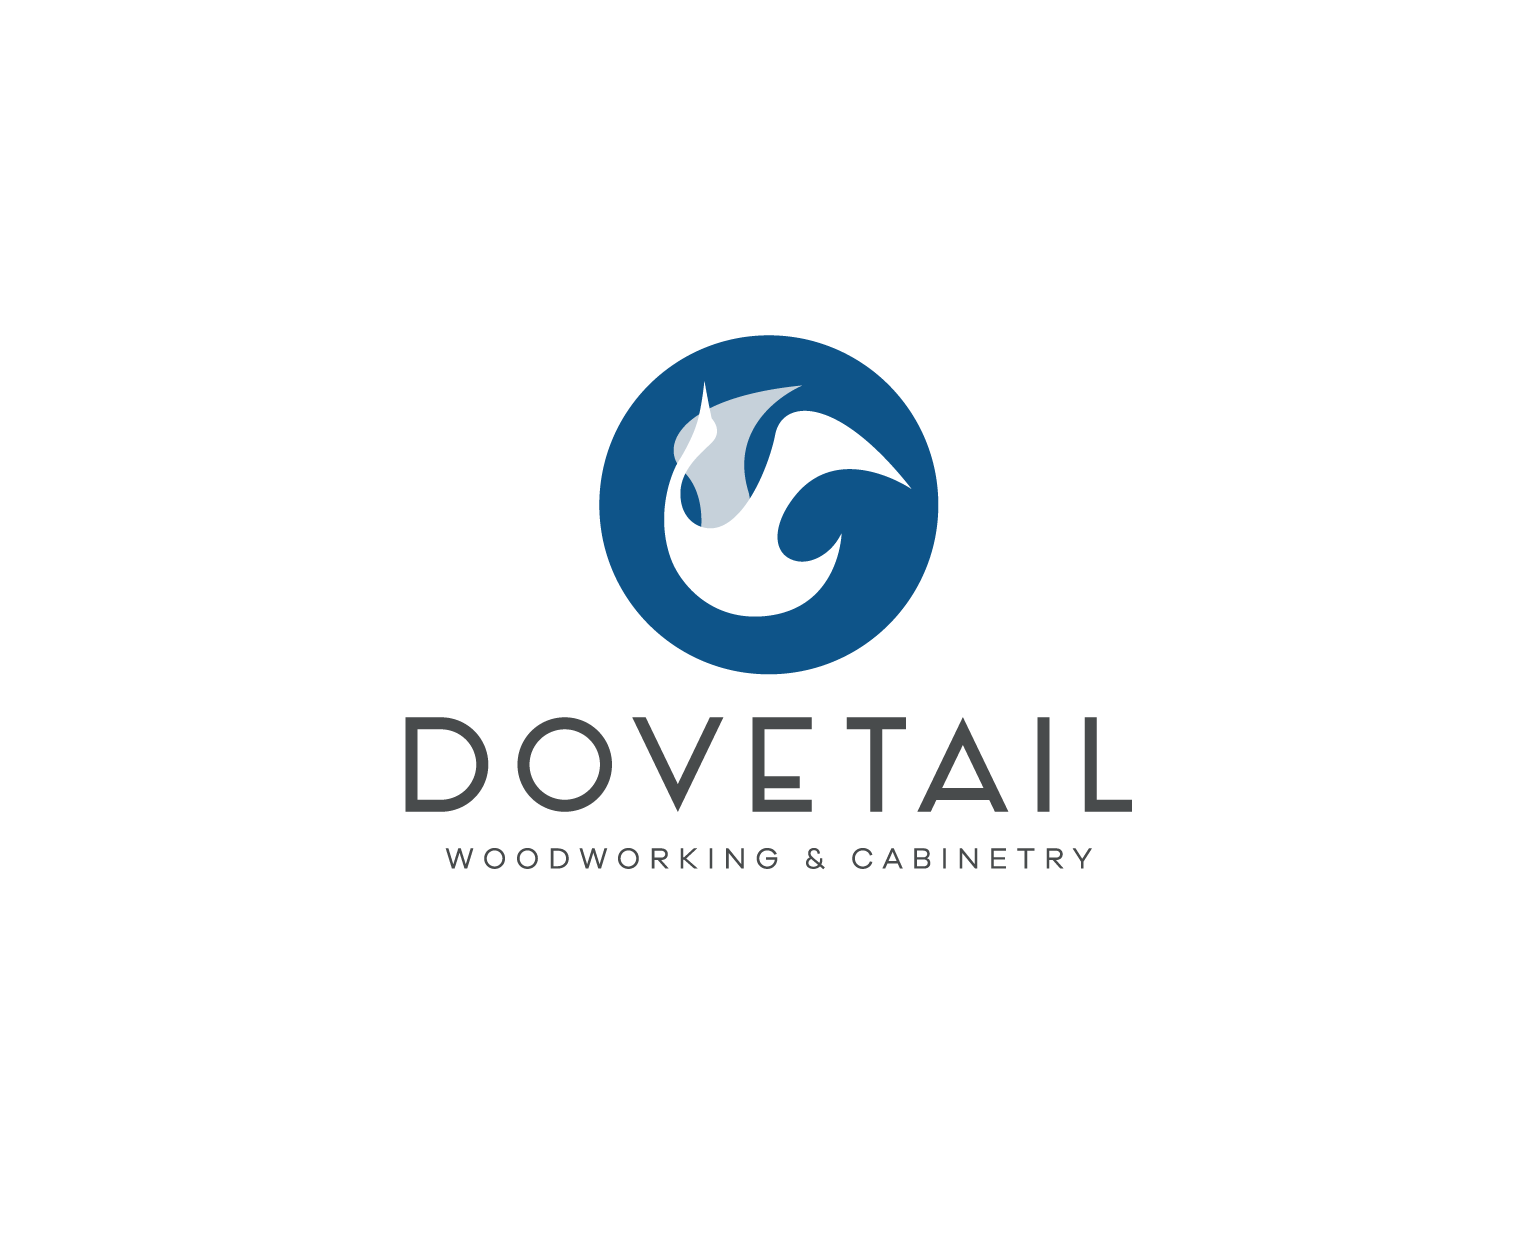 Business branding, logo development and visual identity for Dovetail, a bespoke woodworking and cabinetry shop run by a duo of passionate women.